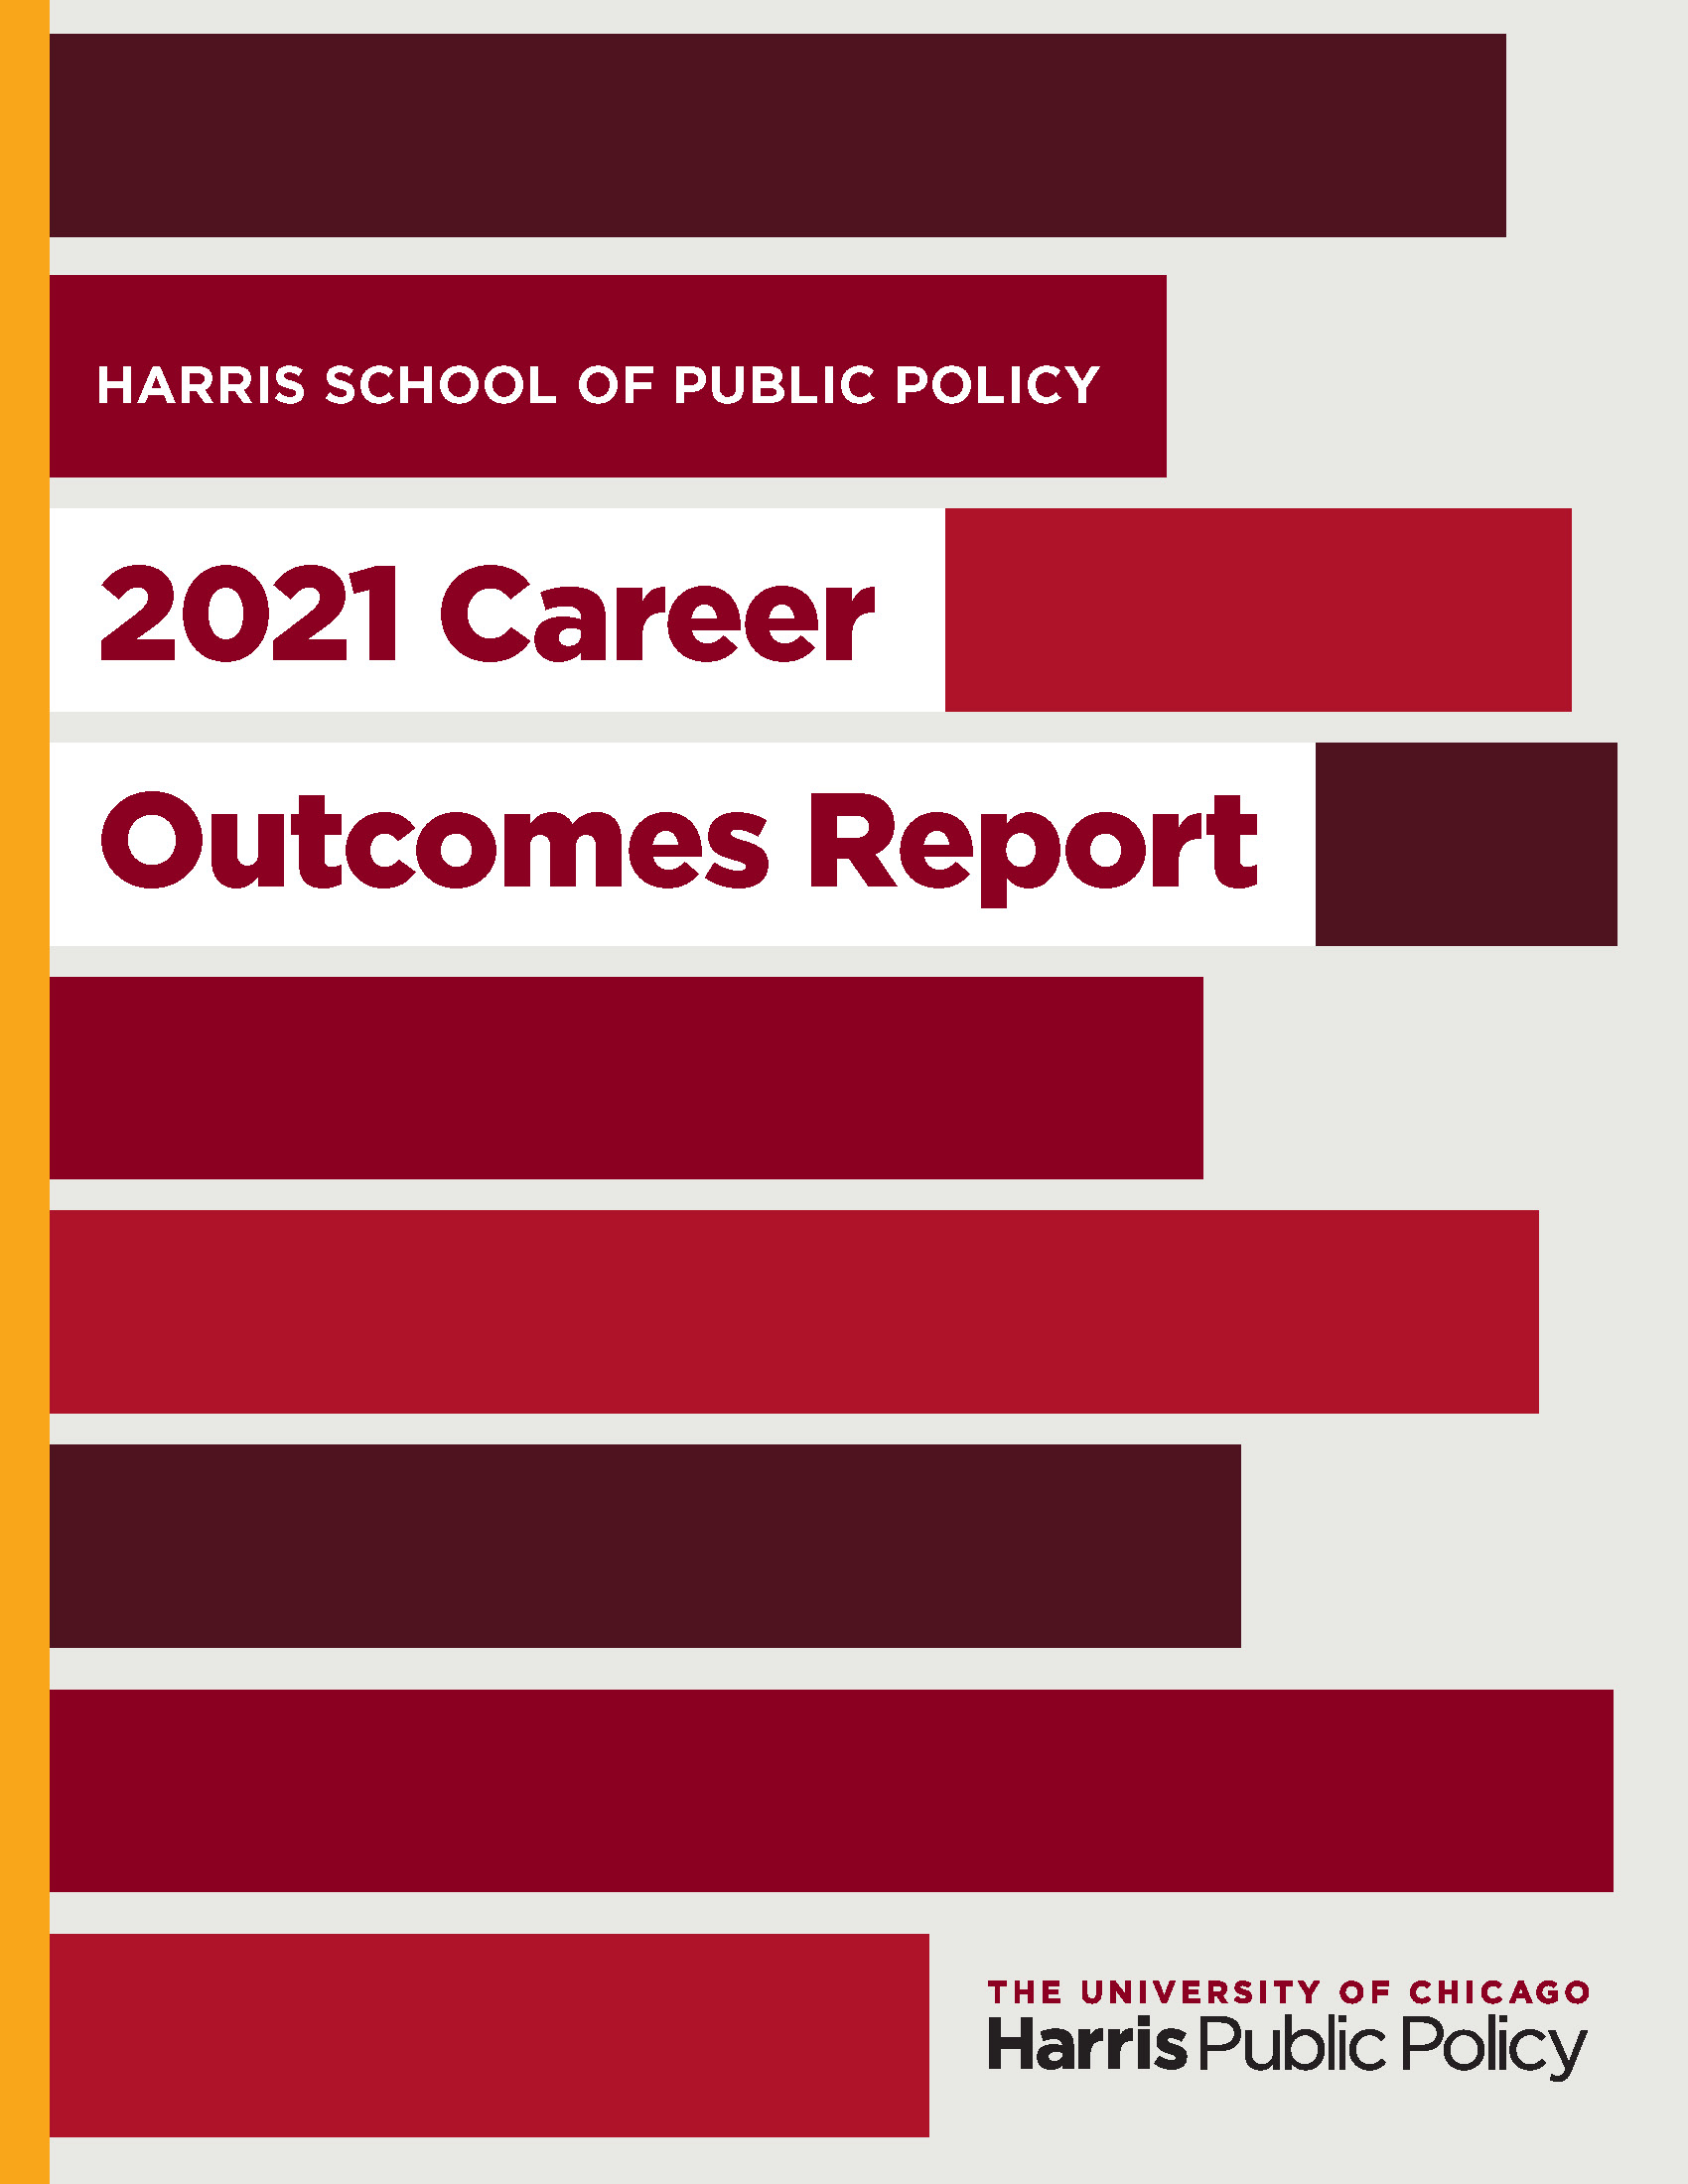 2021 Career Outcomes Report